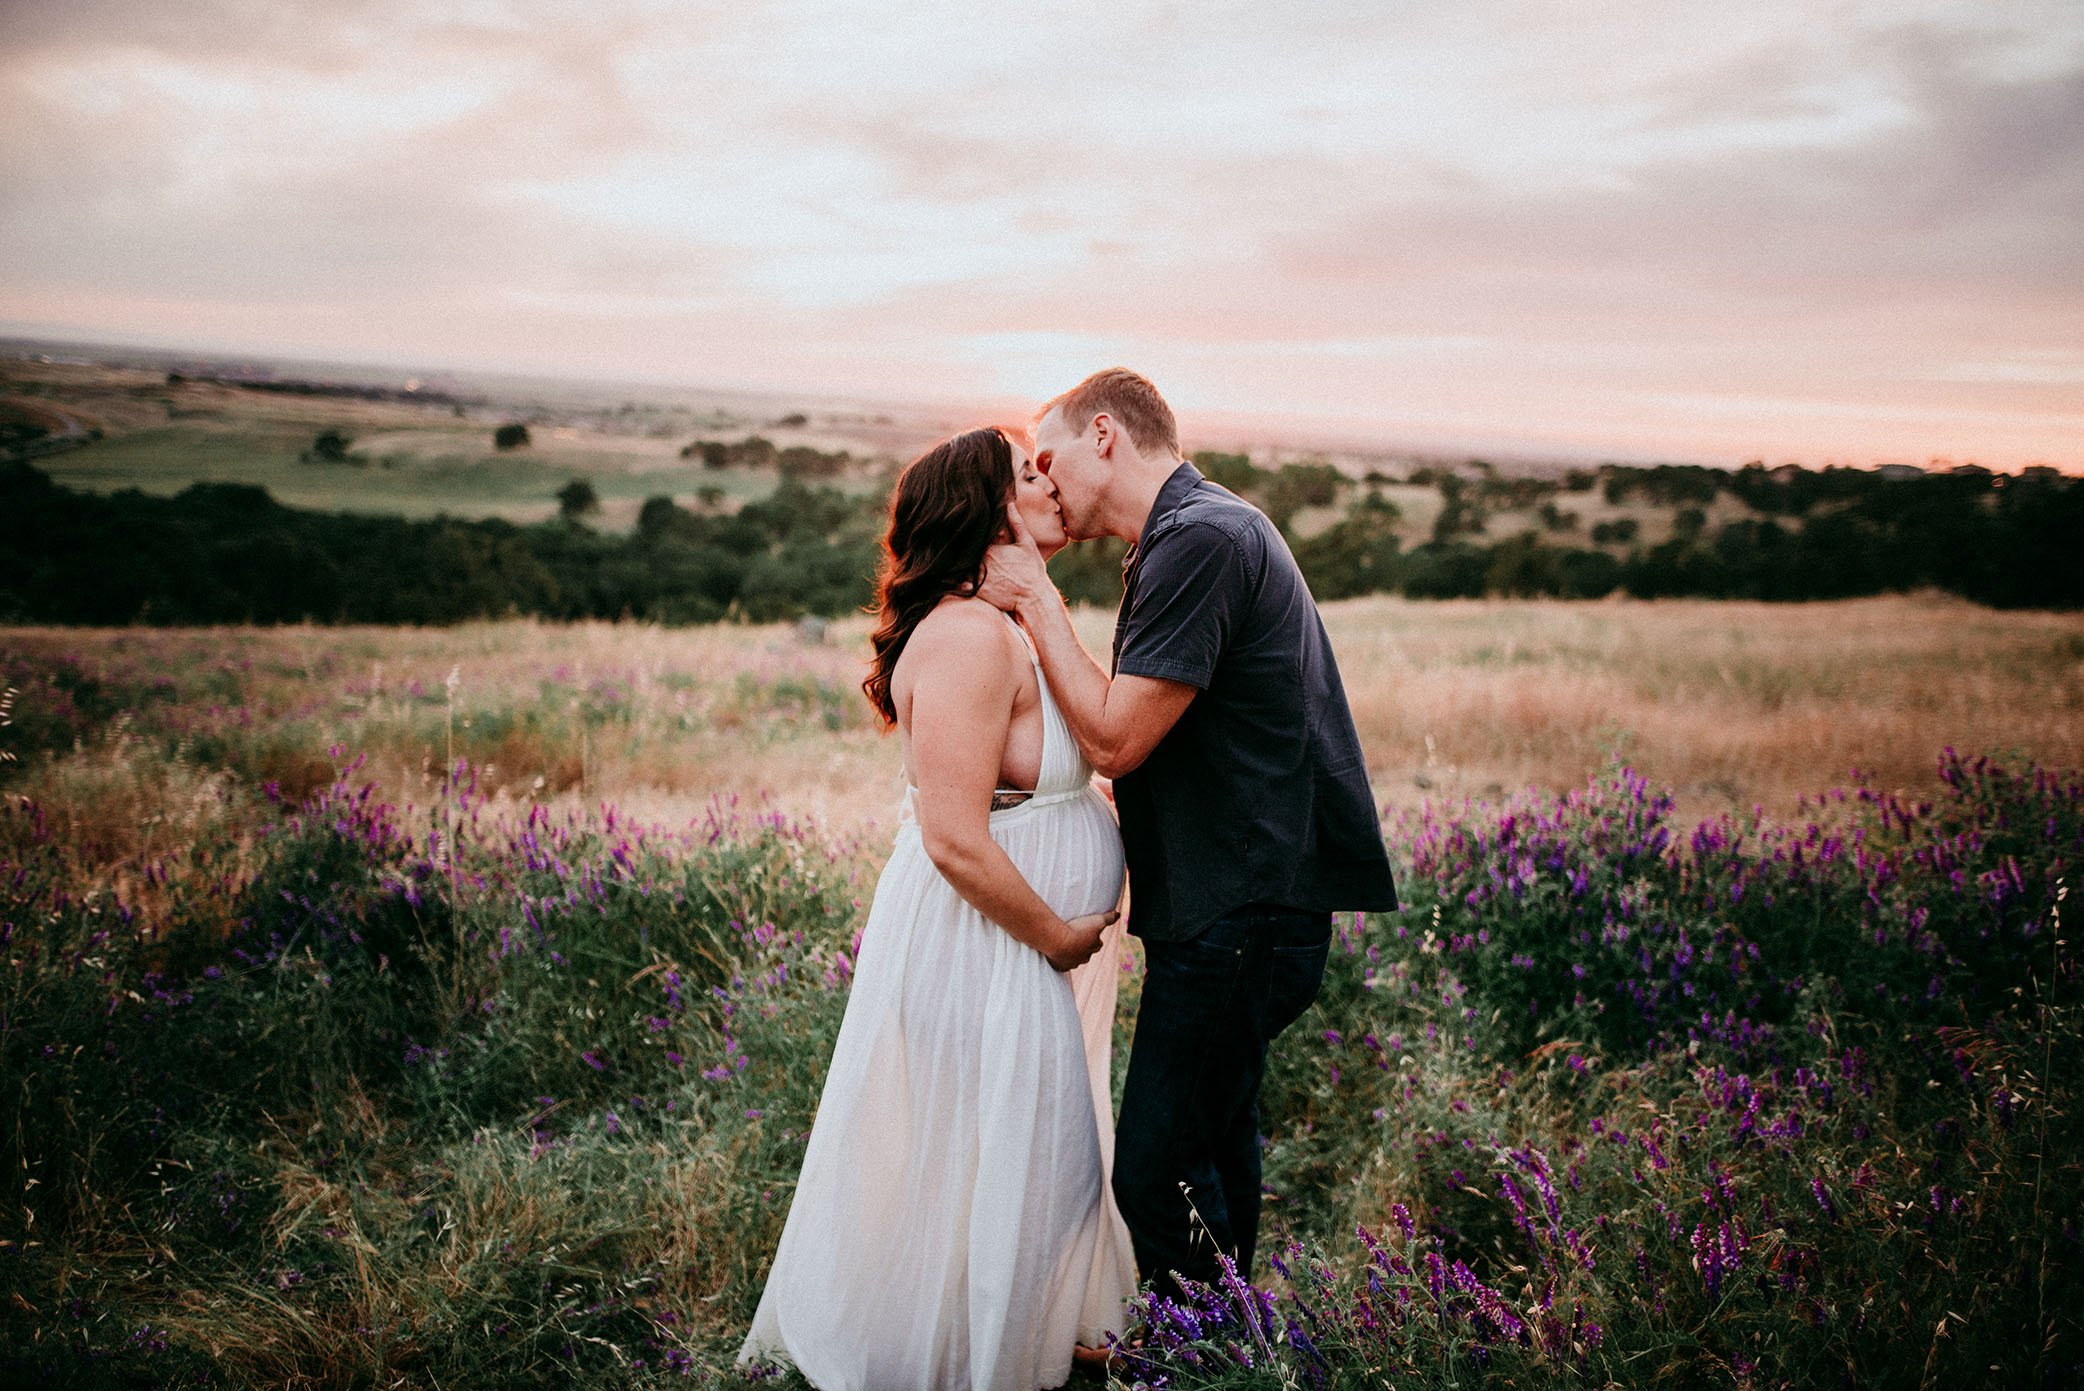 Pregnant woman kissing husband at sunset wearing white dress captured by Sweet Beginnings Photography by Stephanie